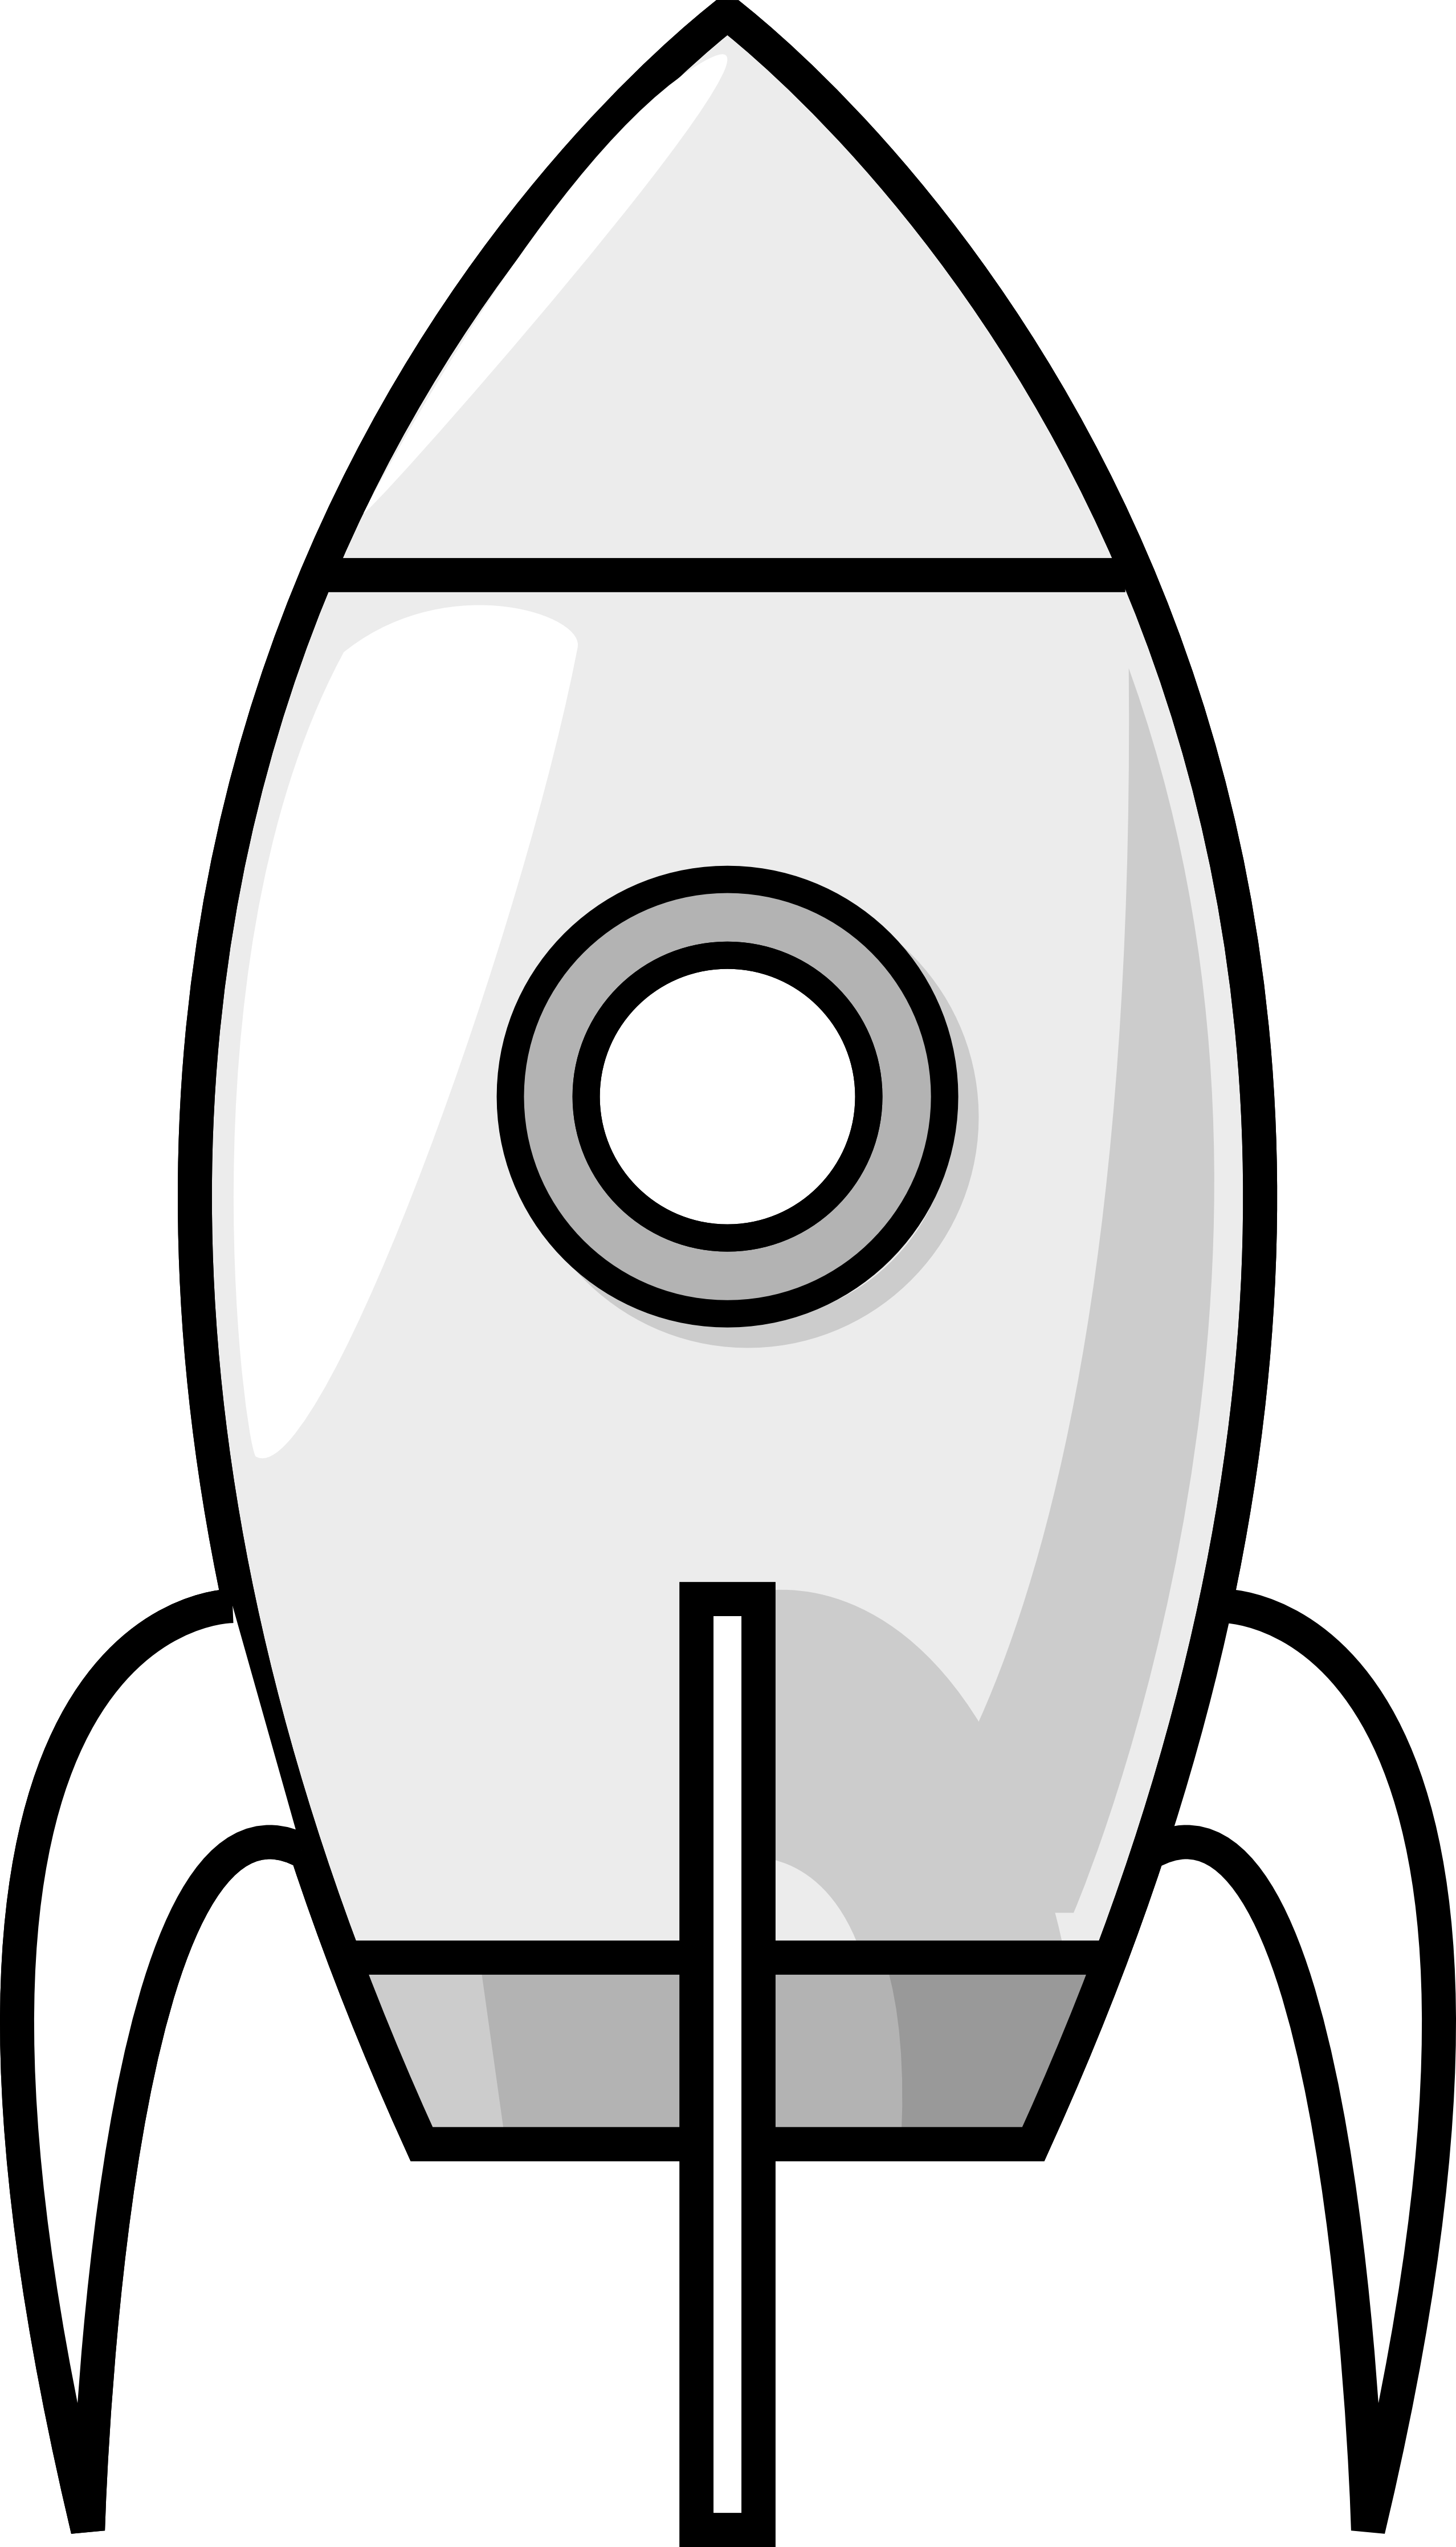 Rocketship clipart space flight. Rocket black and white